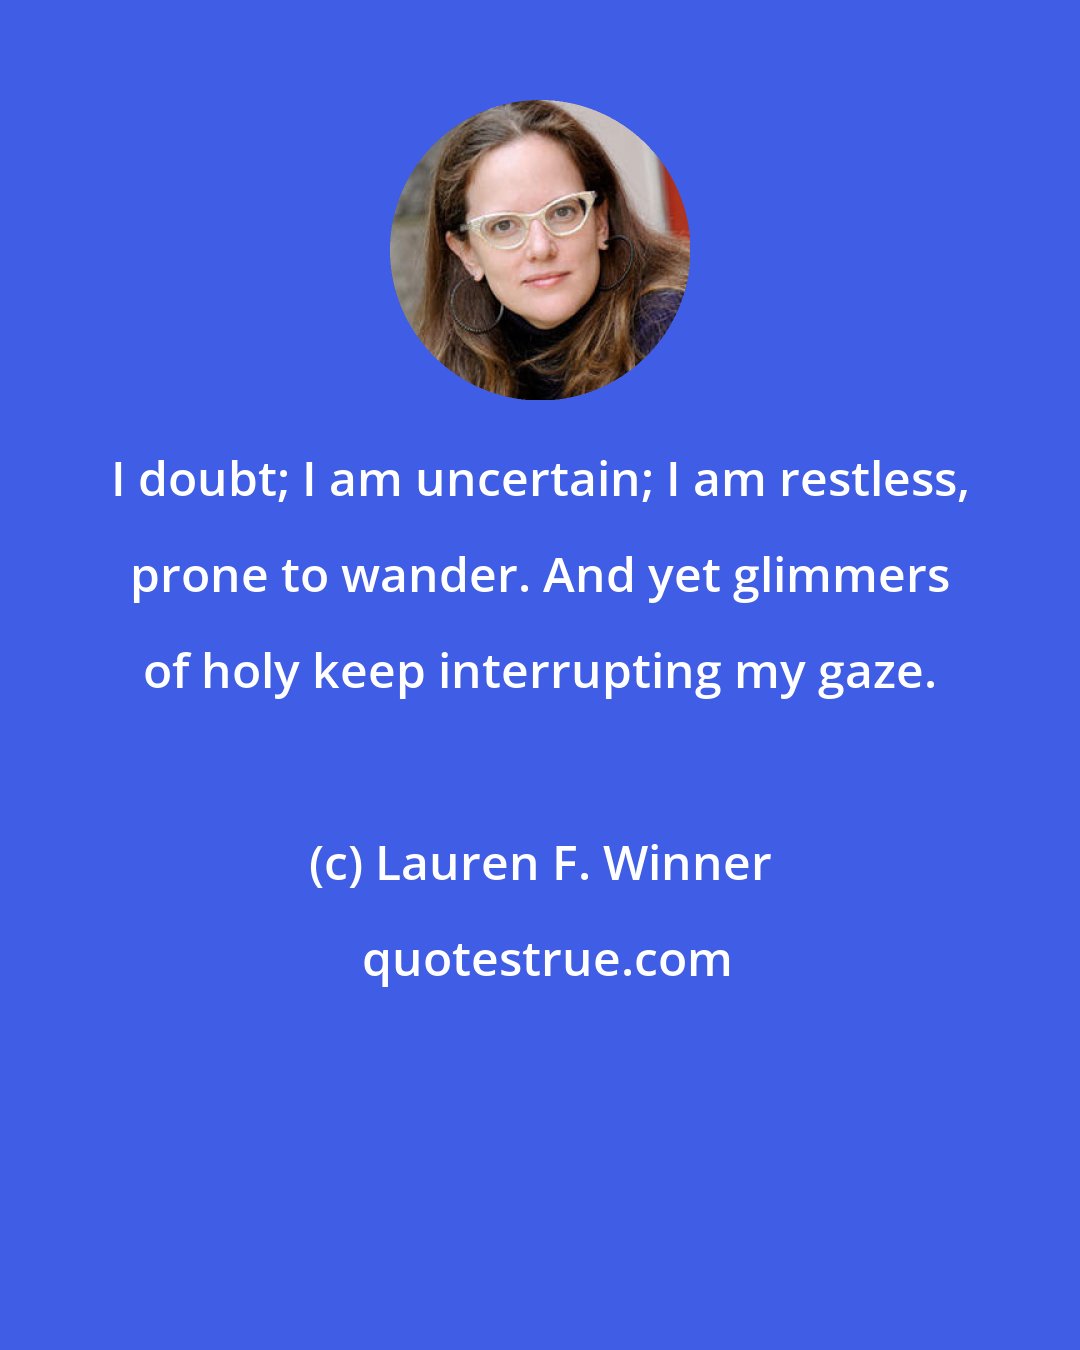 Lauren F. Winner: I doubt; I am uncertain; I am restless, prone to wander. And yet glimmers of holy keep interrupting my gaze.